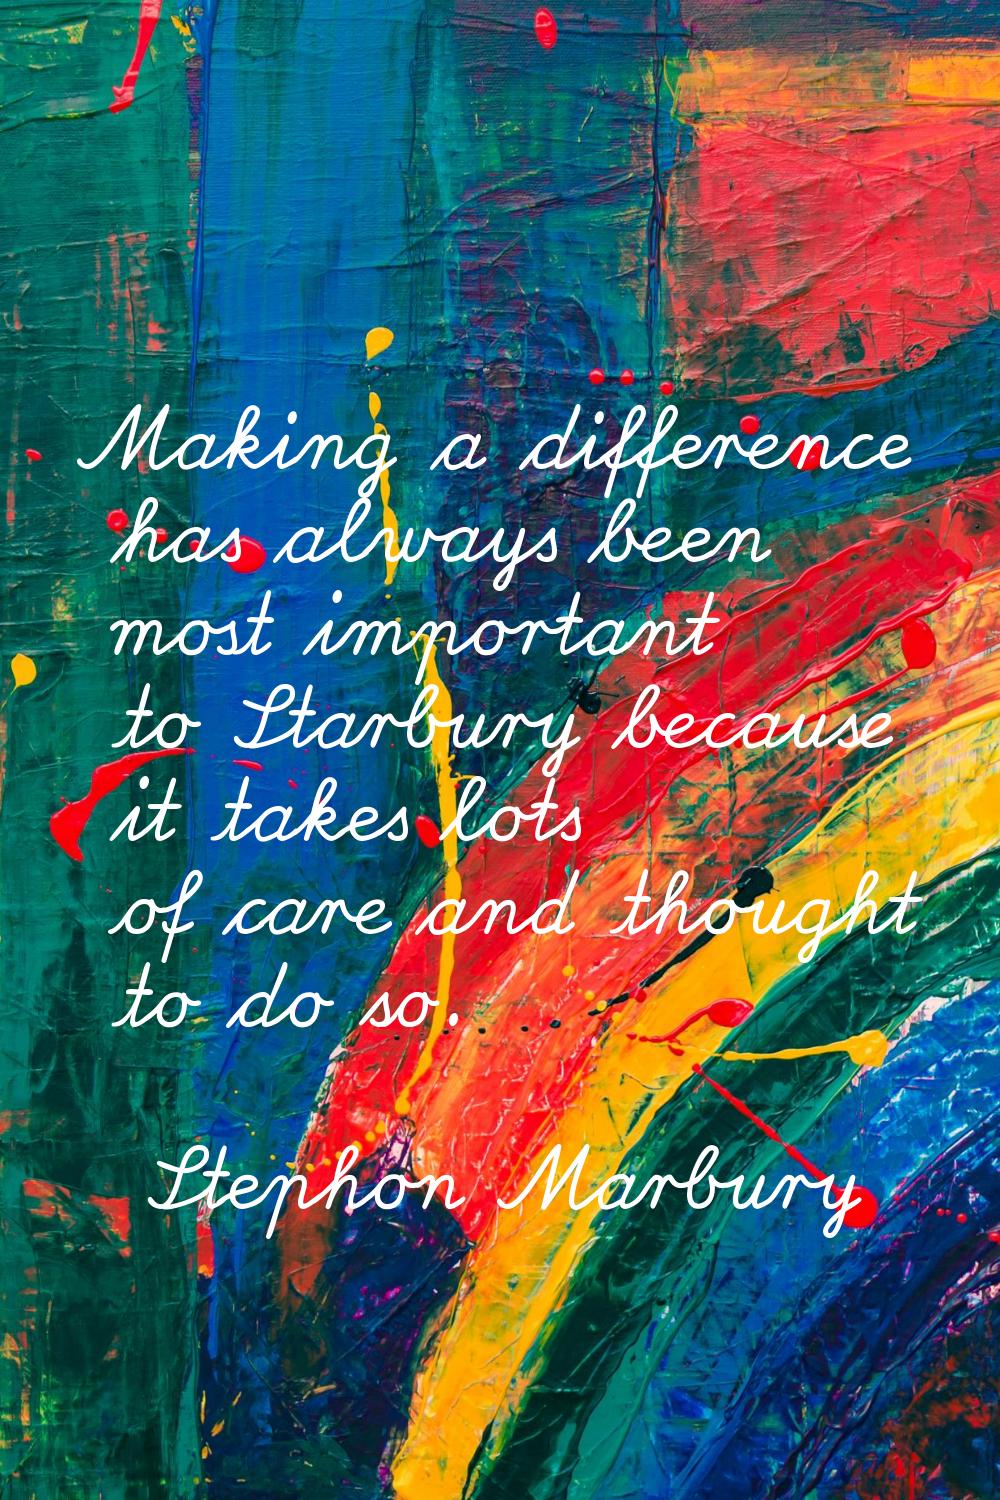 Making a difference has always been most important to Starbury because it takes lots of care and th